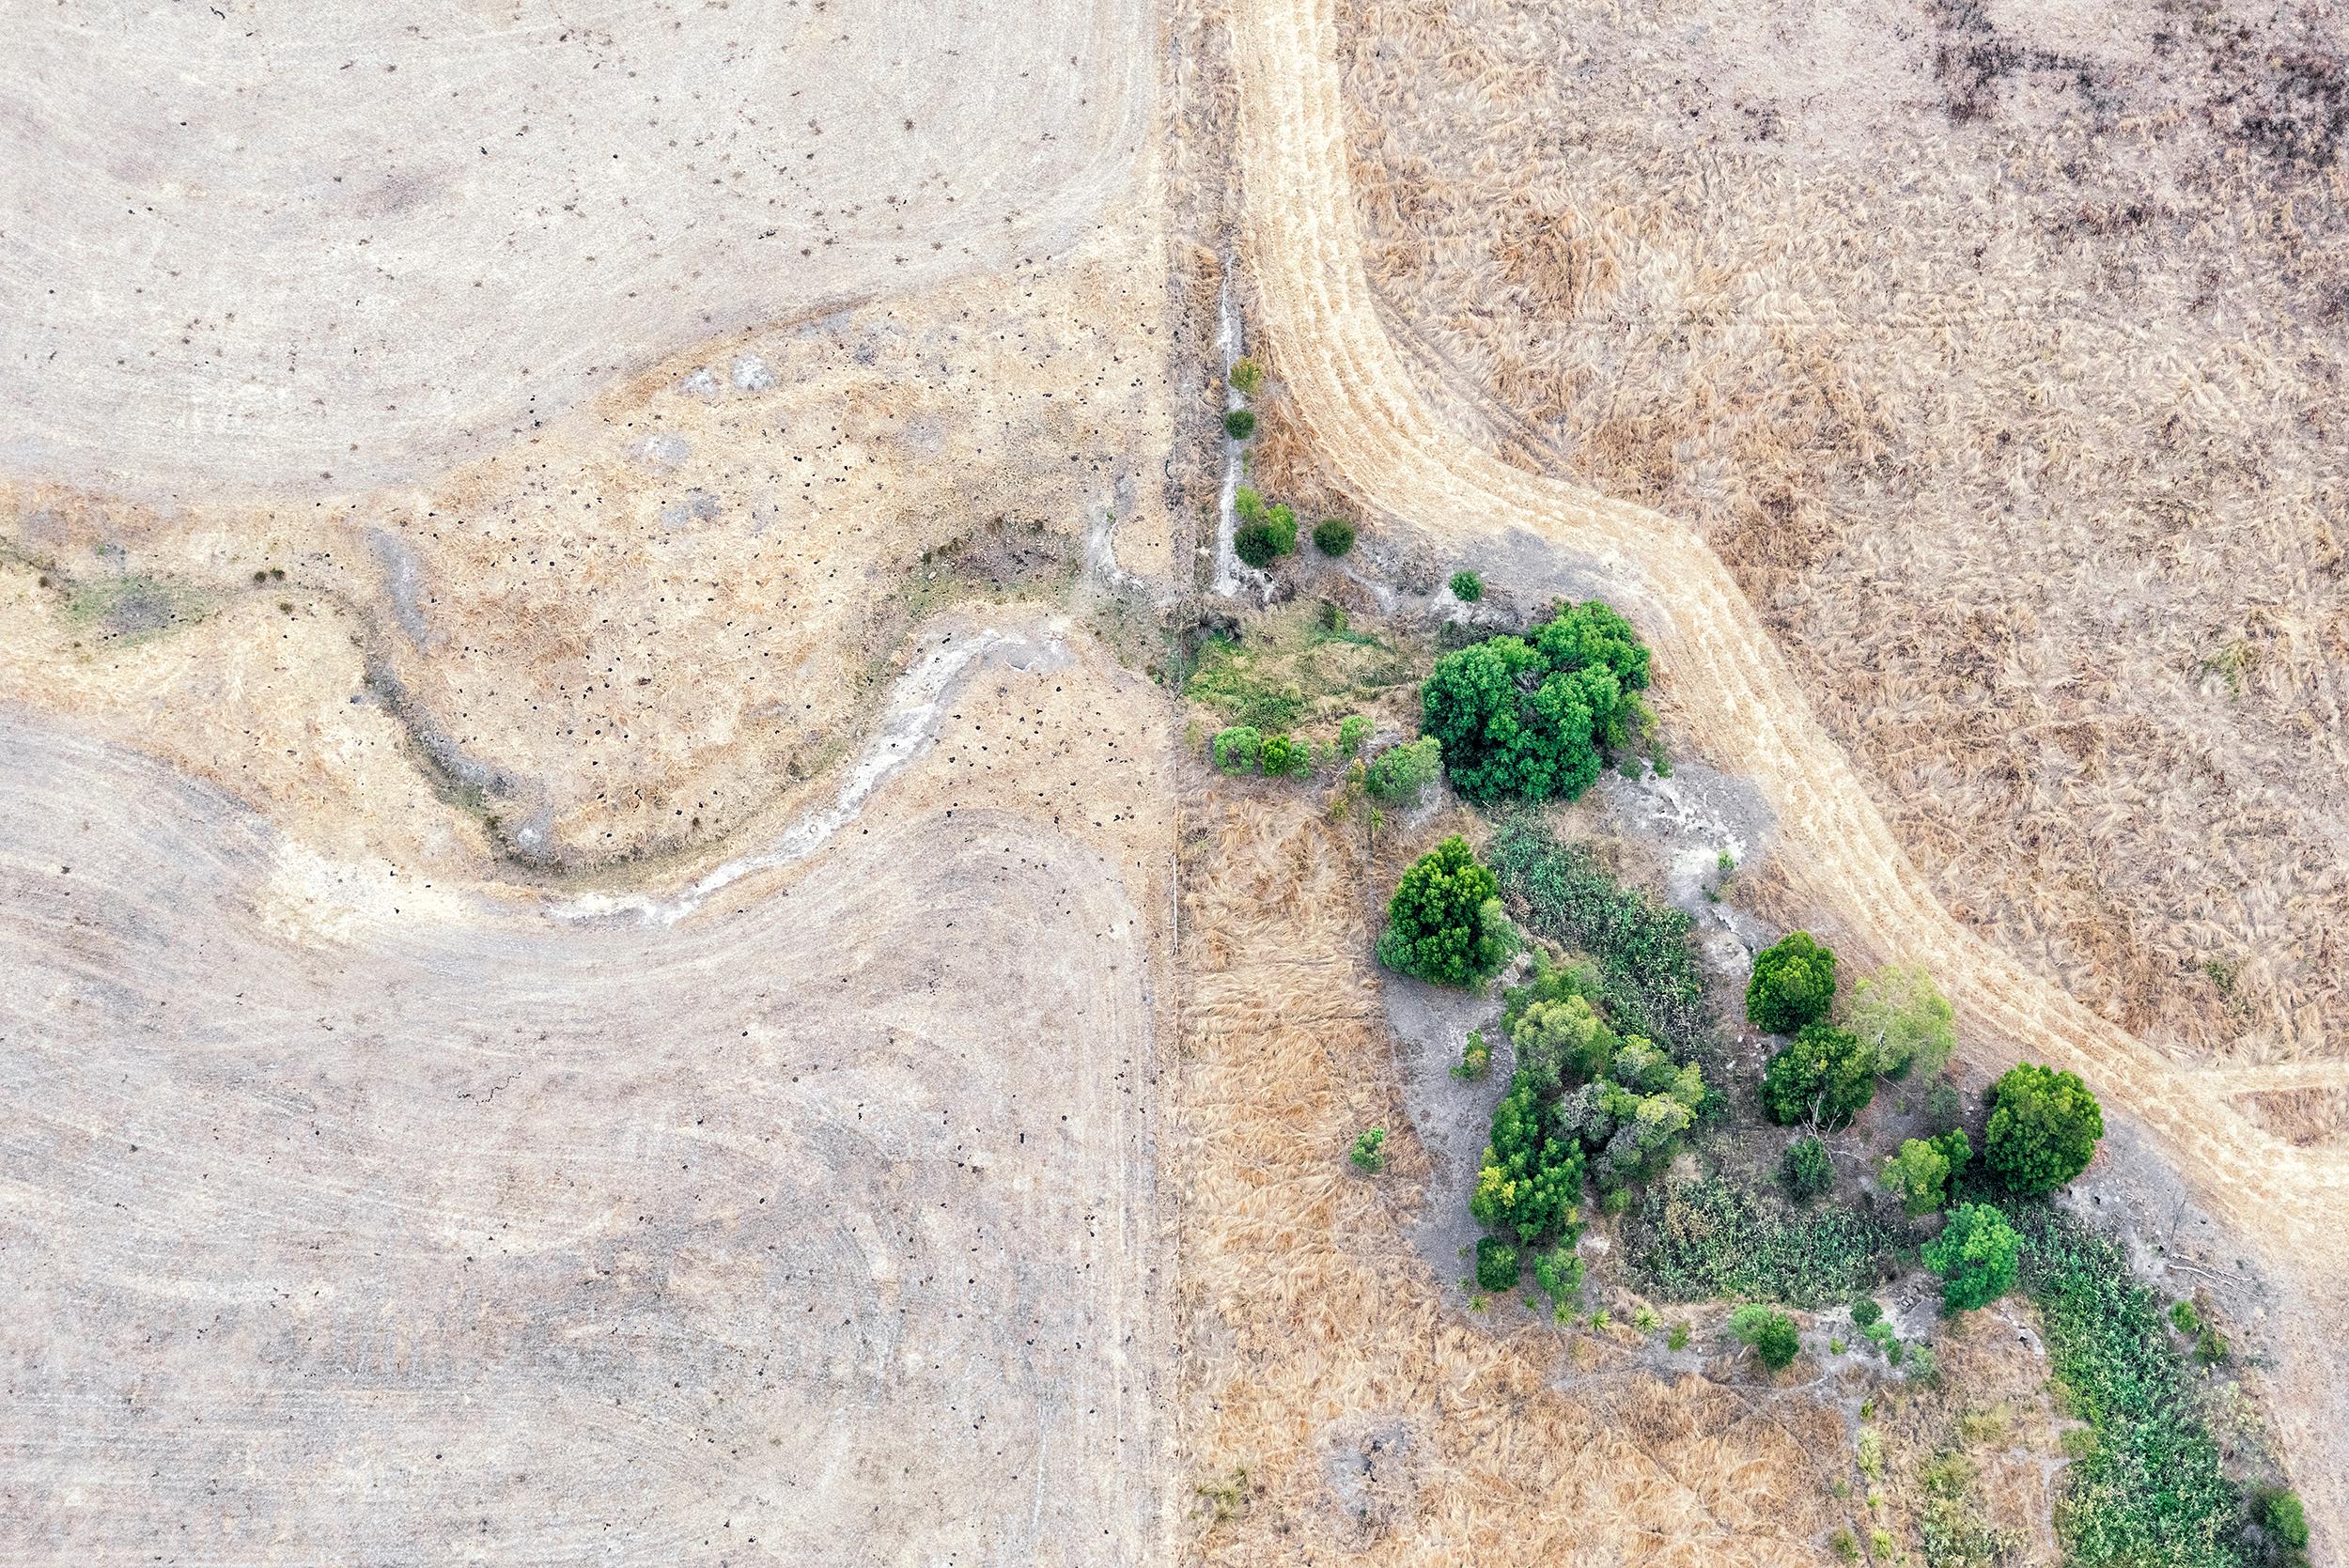 40"x60" limited edition of 5, signed on reverse by the artist.  A vertical line bisects the two sides of this landscape photograph, with an arid dry field on the left and on the right of the image, bright green trees and verdant foliage burst with